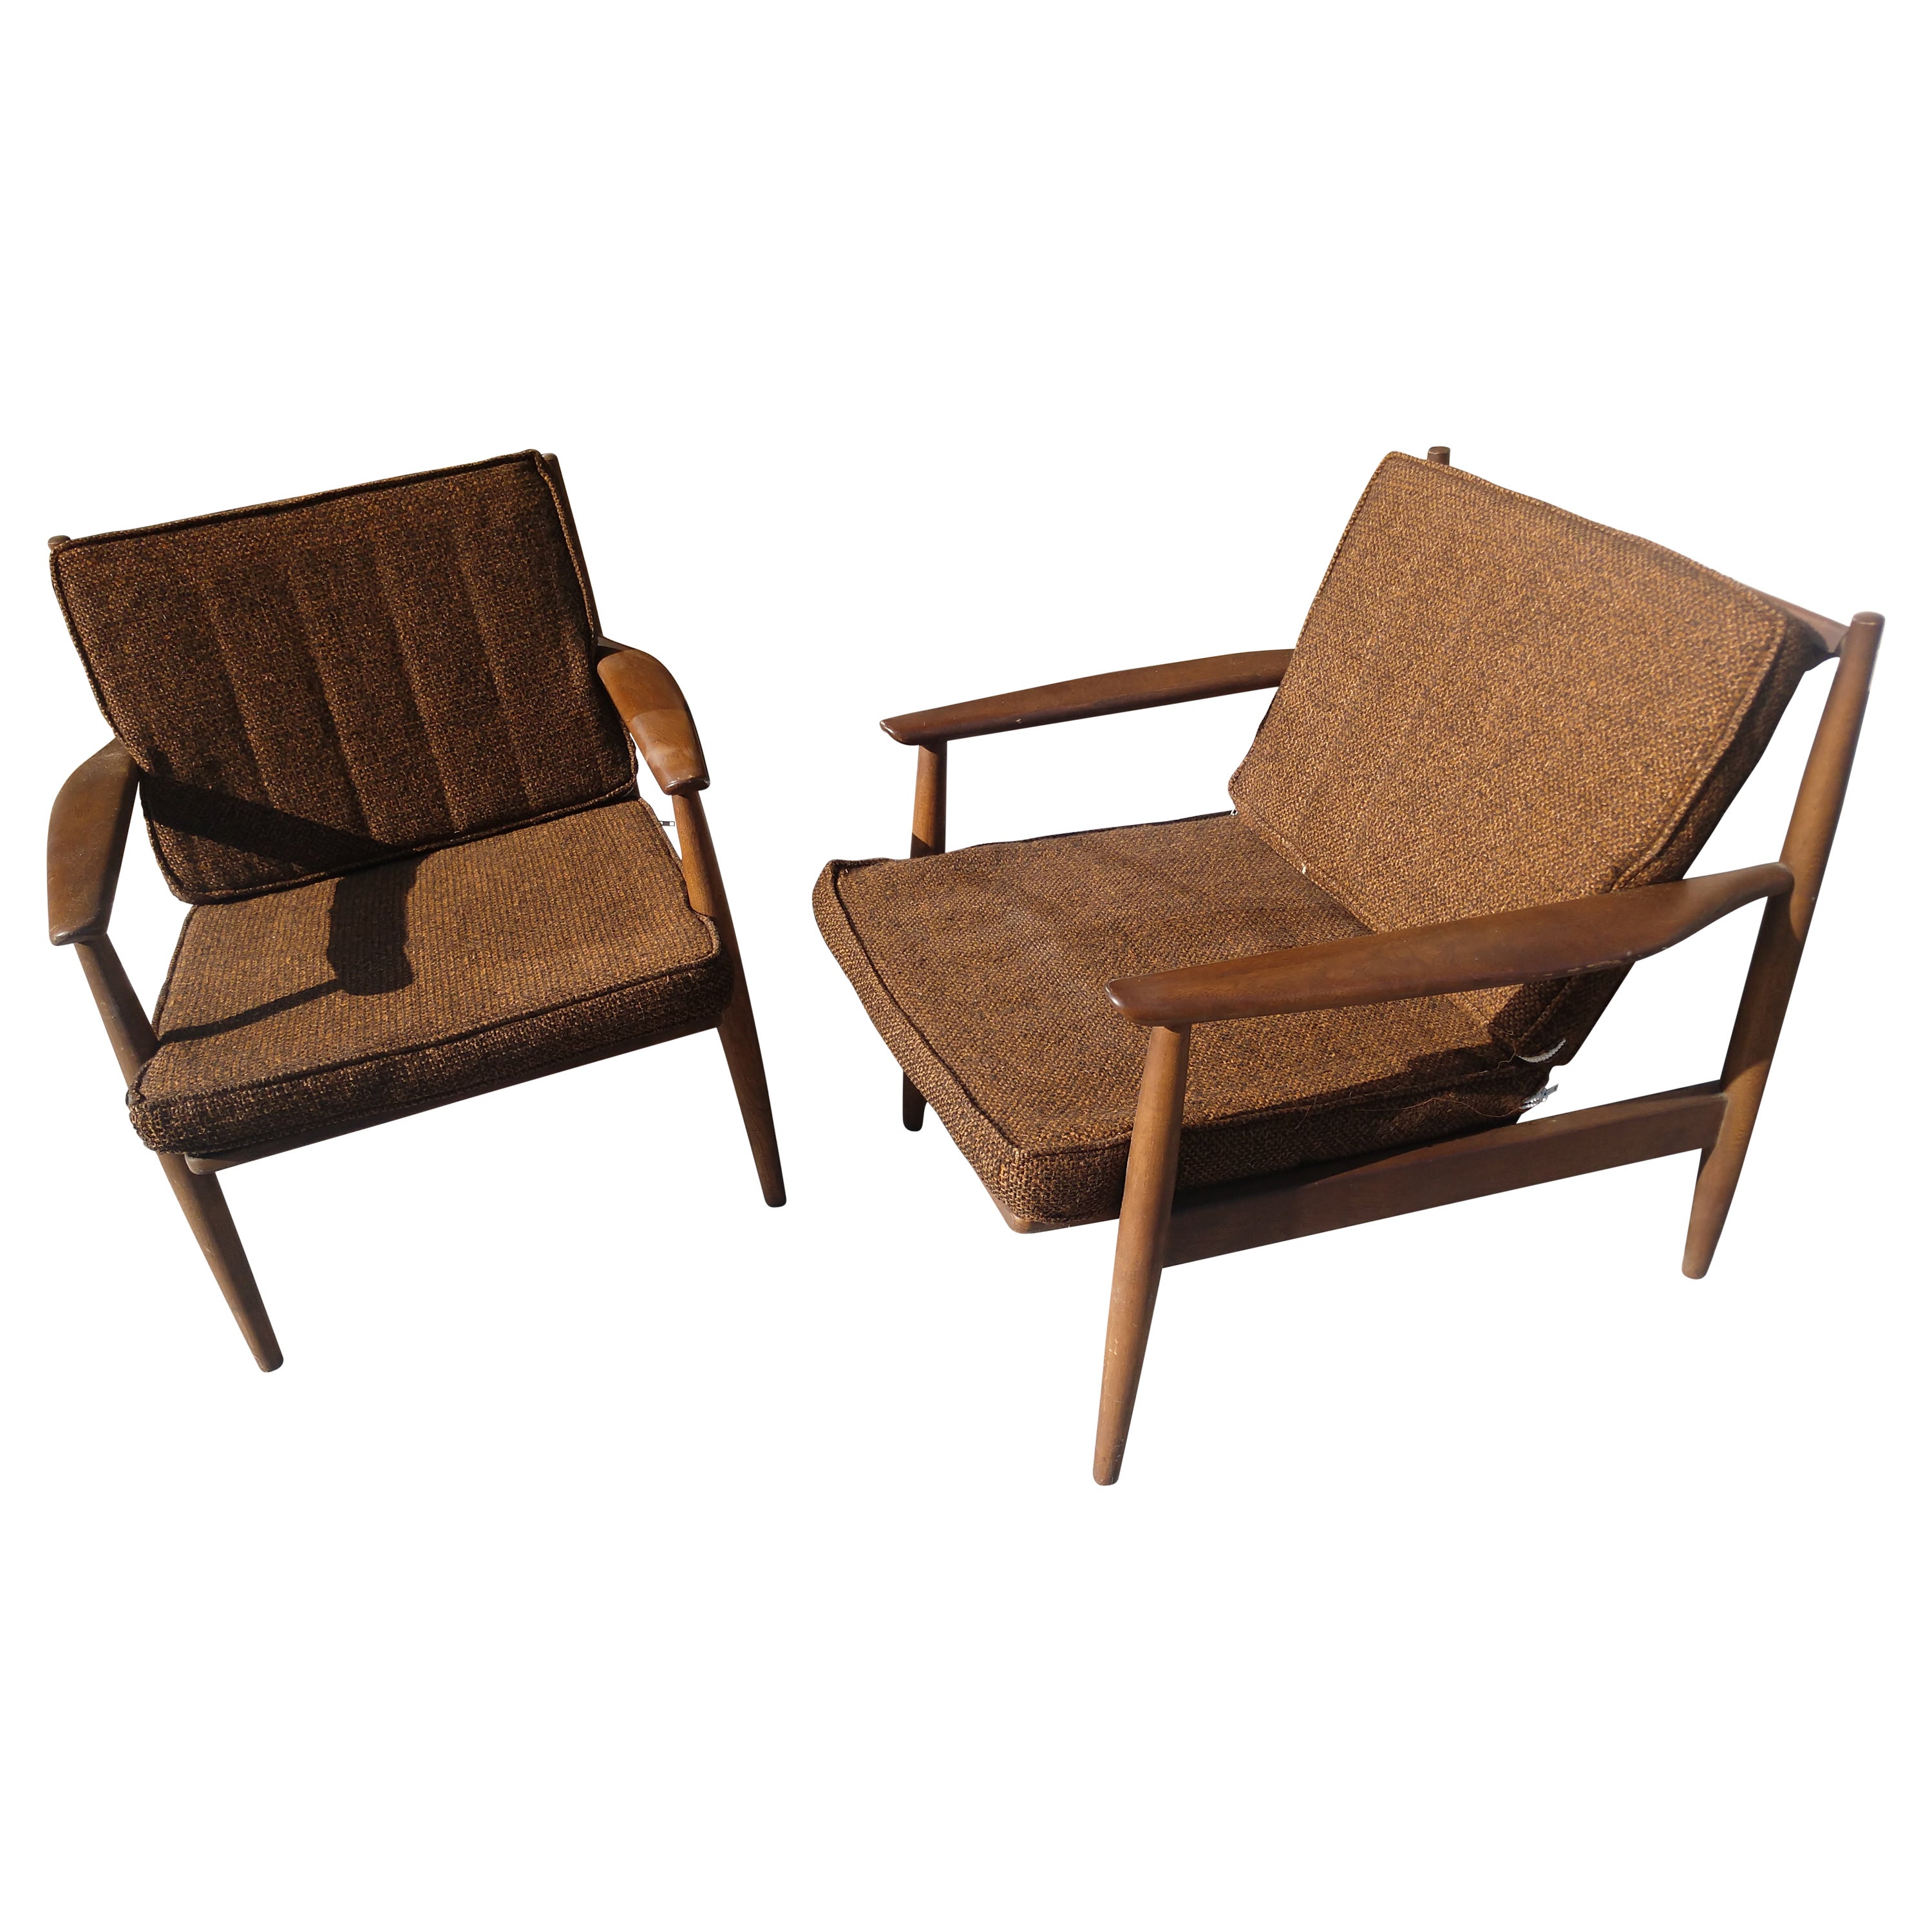 Pair of Mid-Century Modern Lounge Chairs by Viko Baumritter